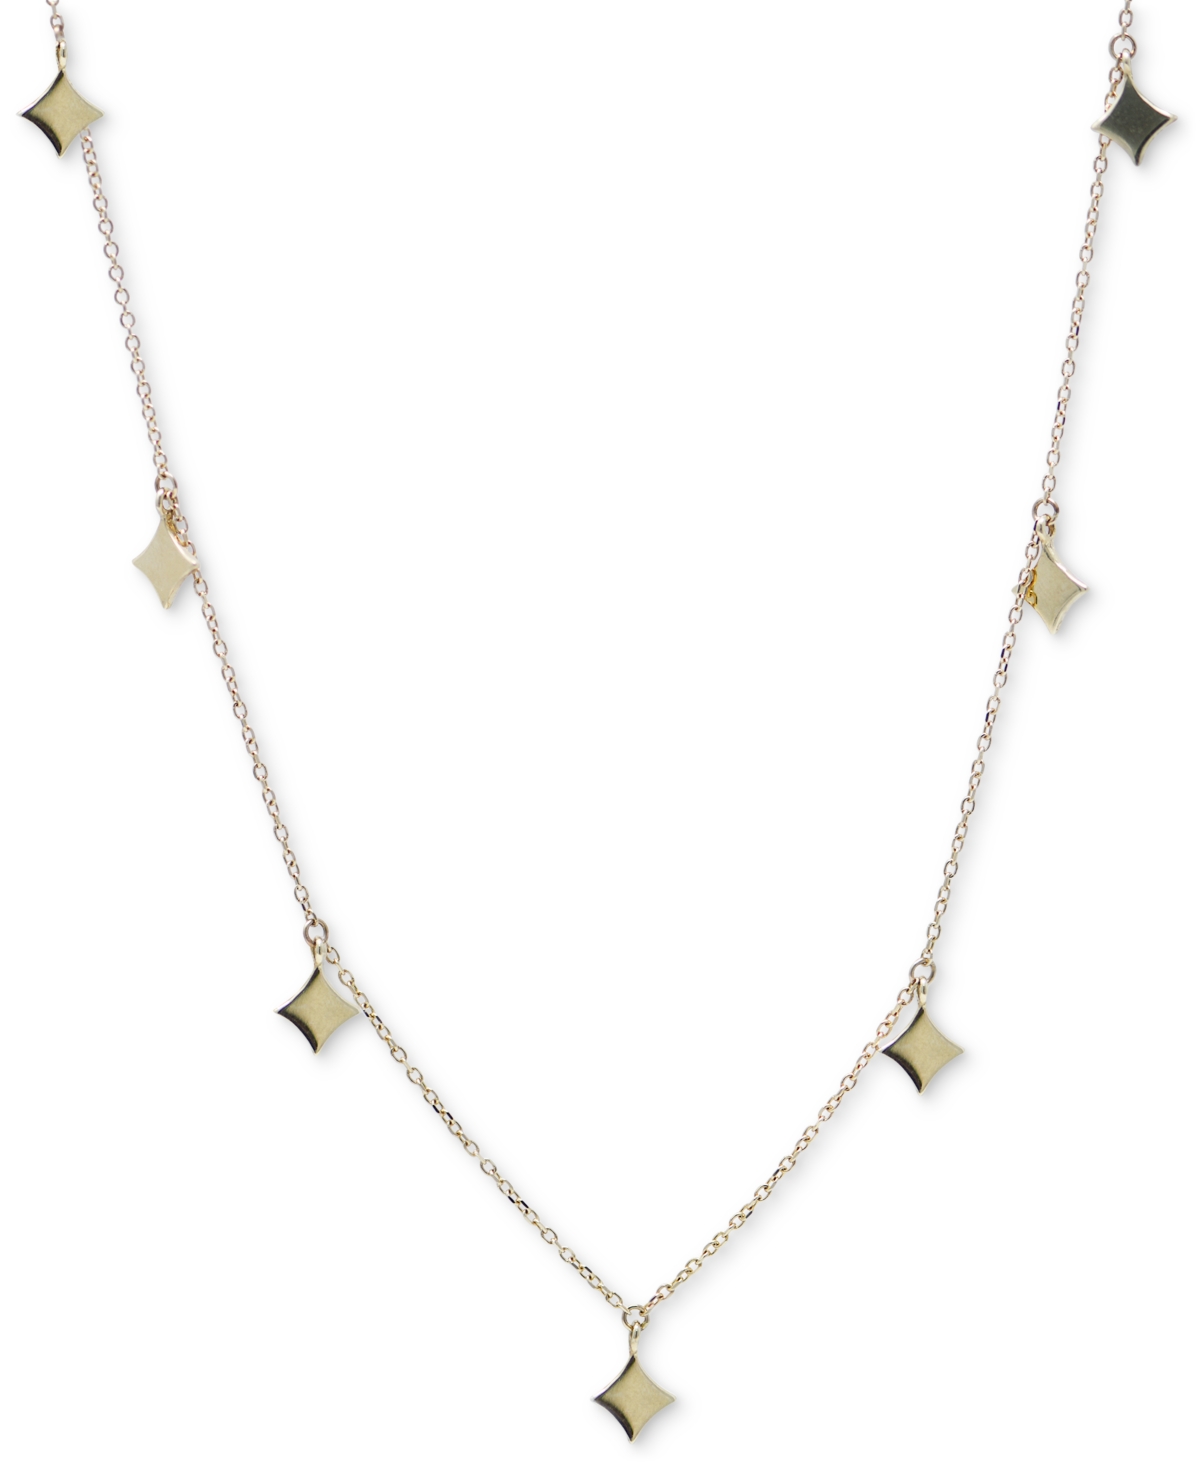 Jac + Jo by Anzie Polished Geometric Dangle Pendant Necklace in 14k Gold, 15" + 1" extender